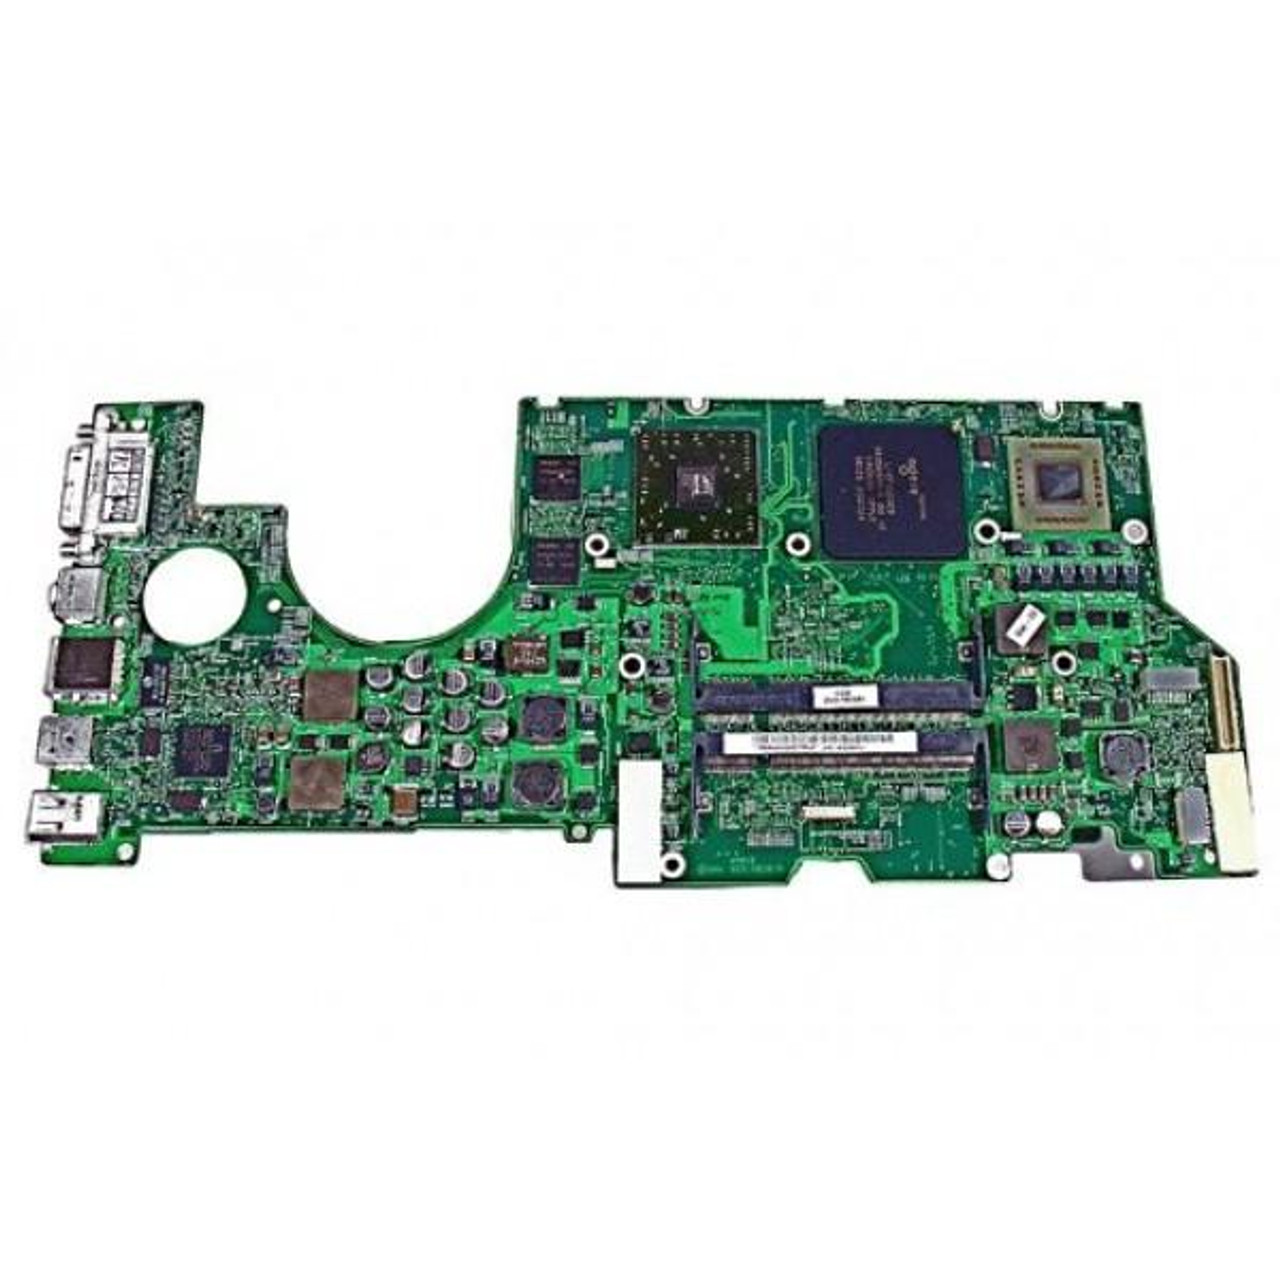 661-3483 Apple System Board (Motherboard) 1.67GHz CPU for PowerPC 7447a (G4) (Refurbished)